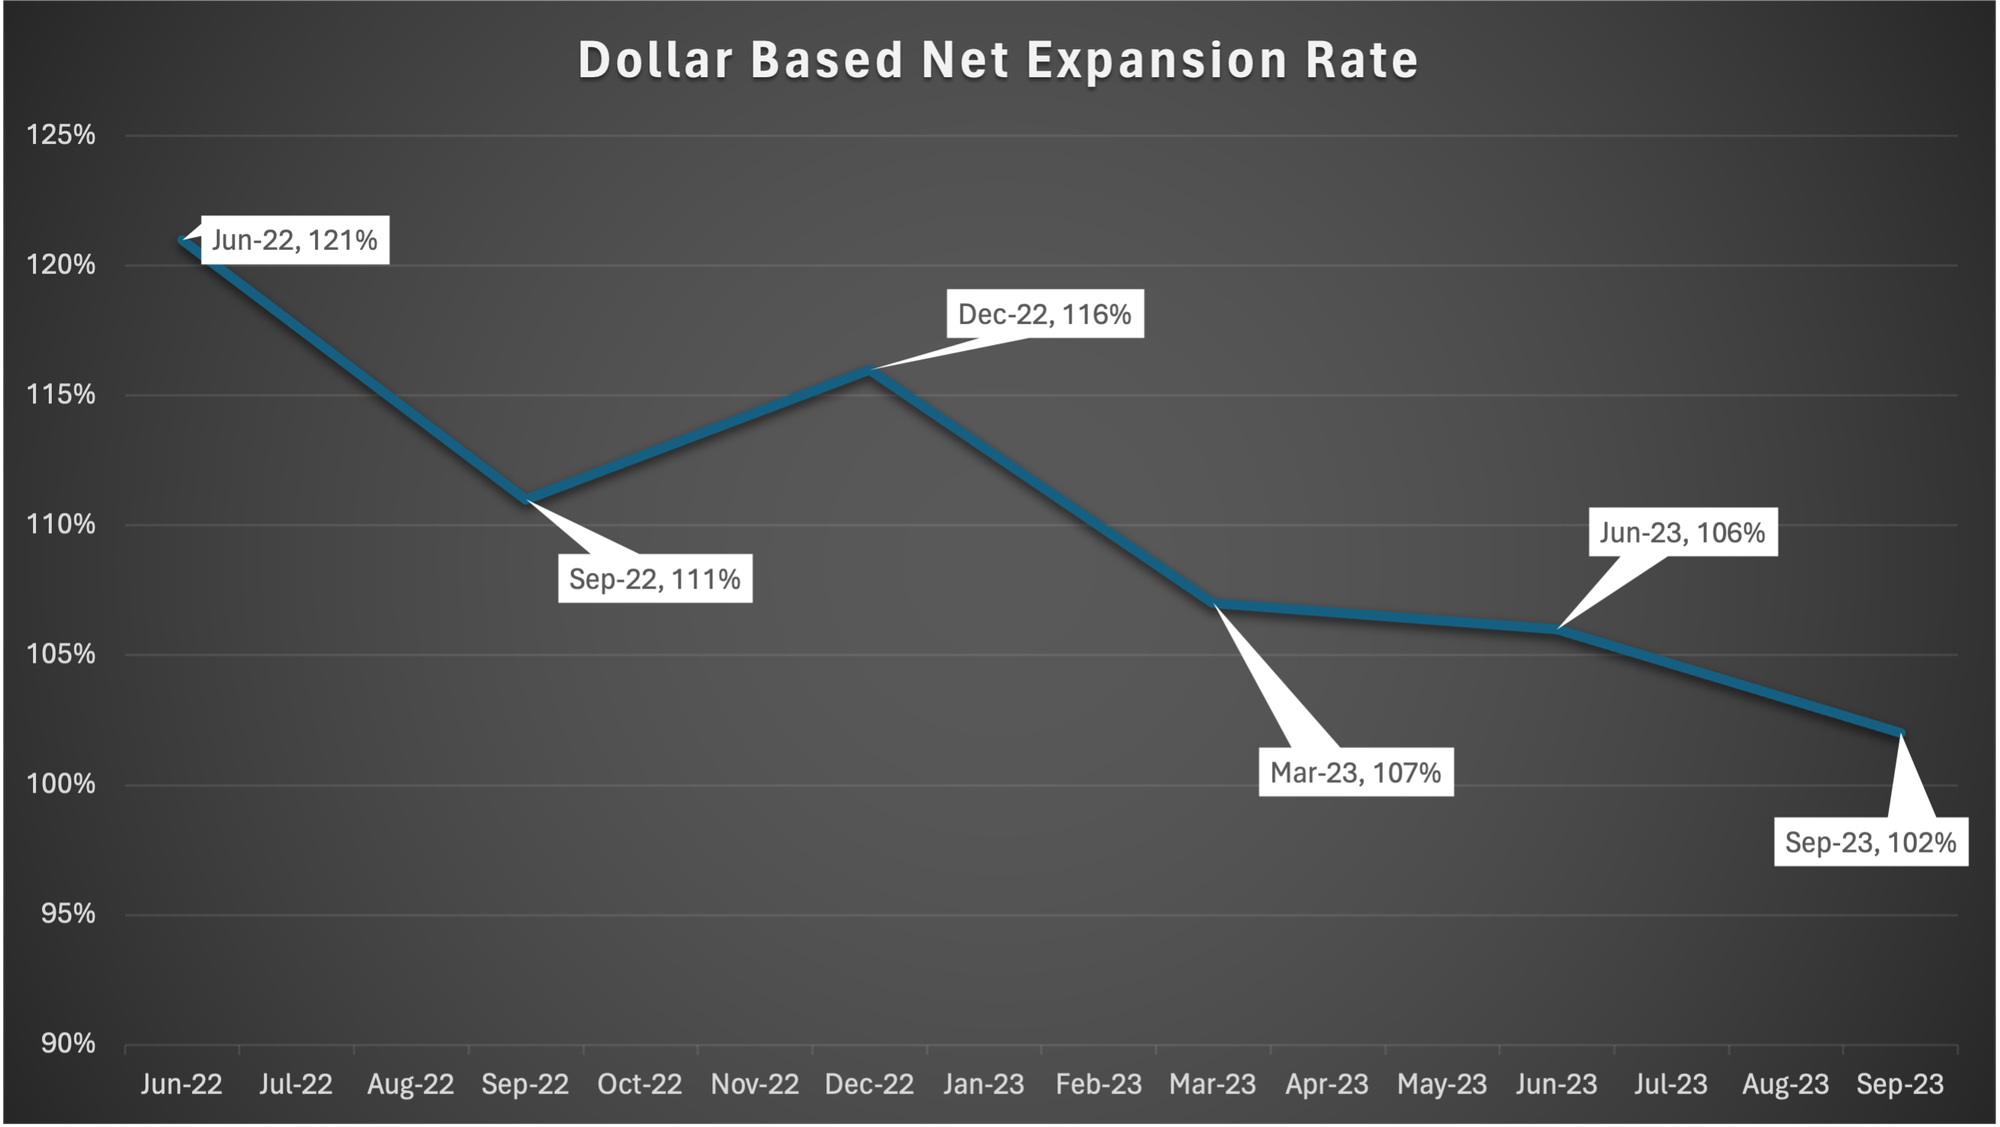 Unity's Dollar Based Net Expansion Rate